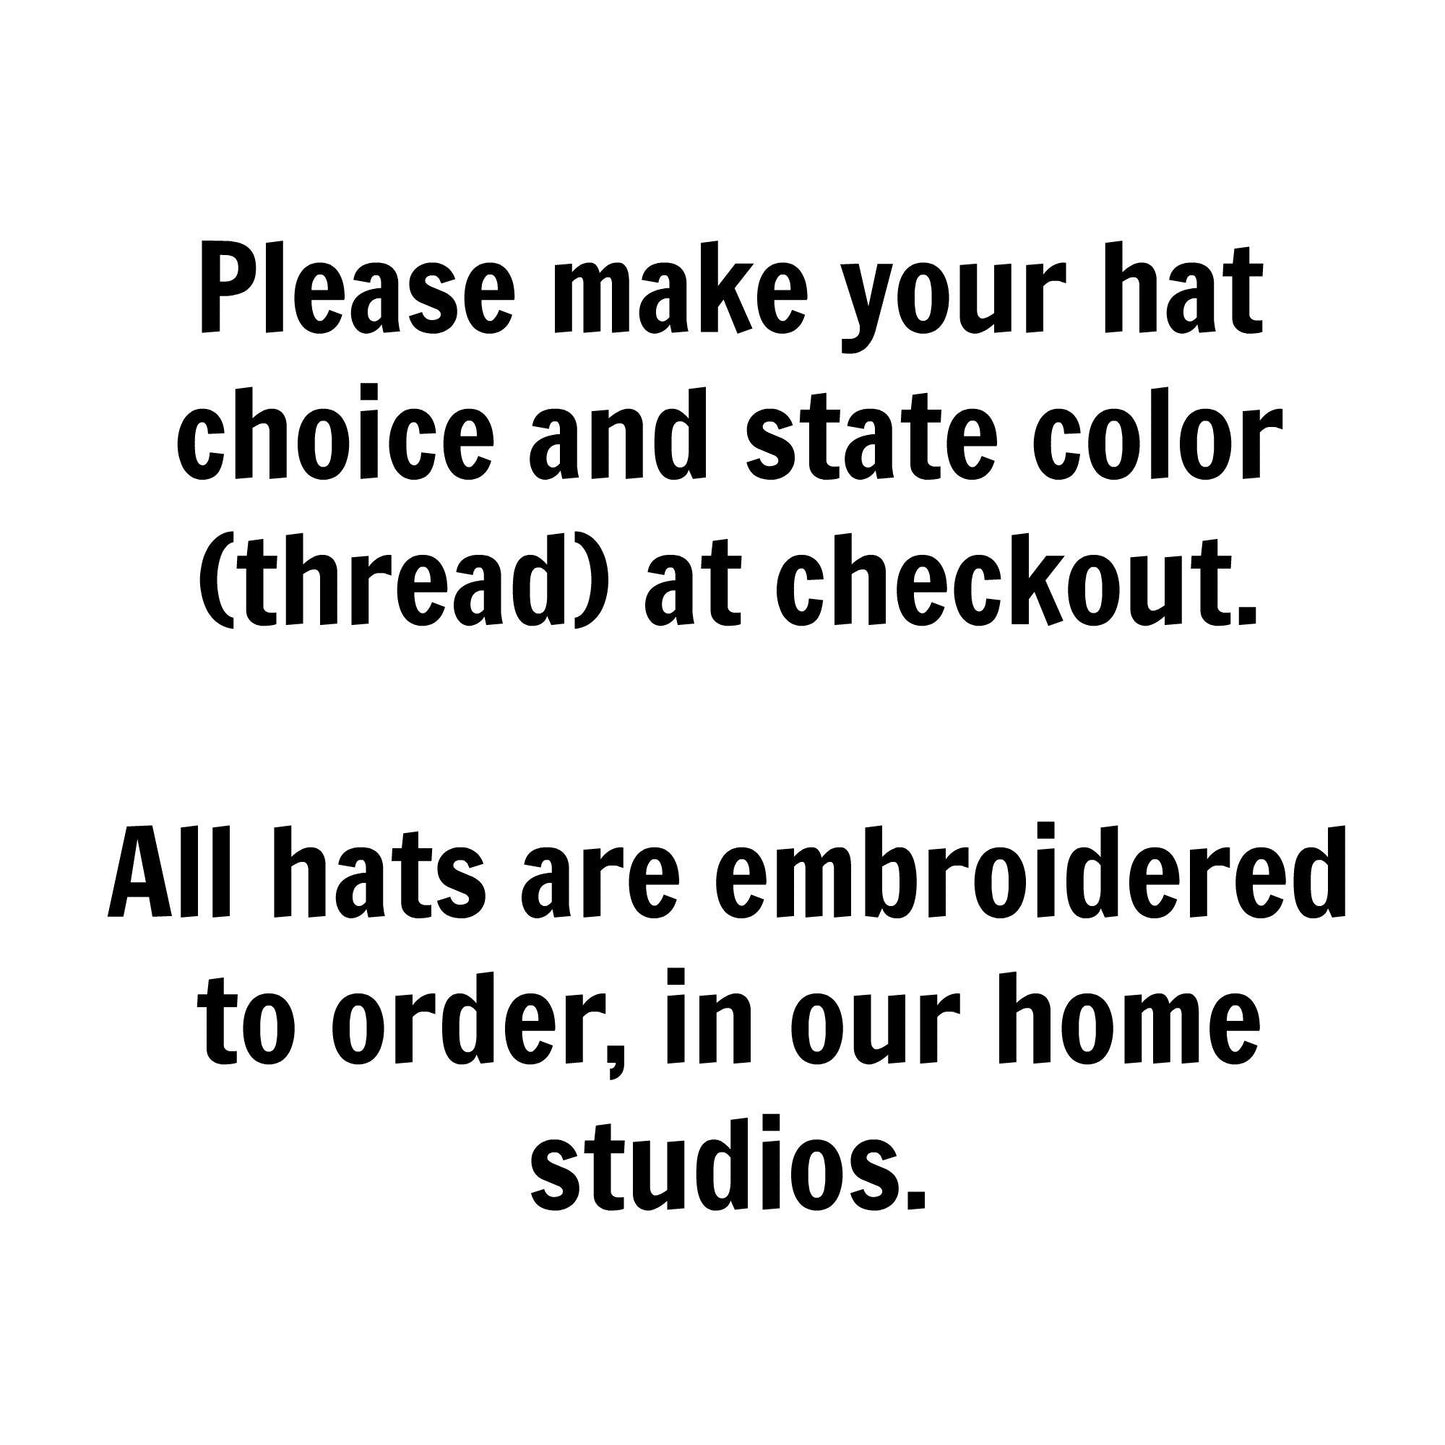 Maryland Hat | Distressed Snapback Trucker | state cap | many color choices